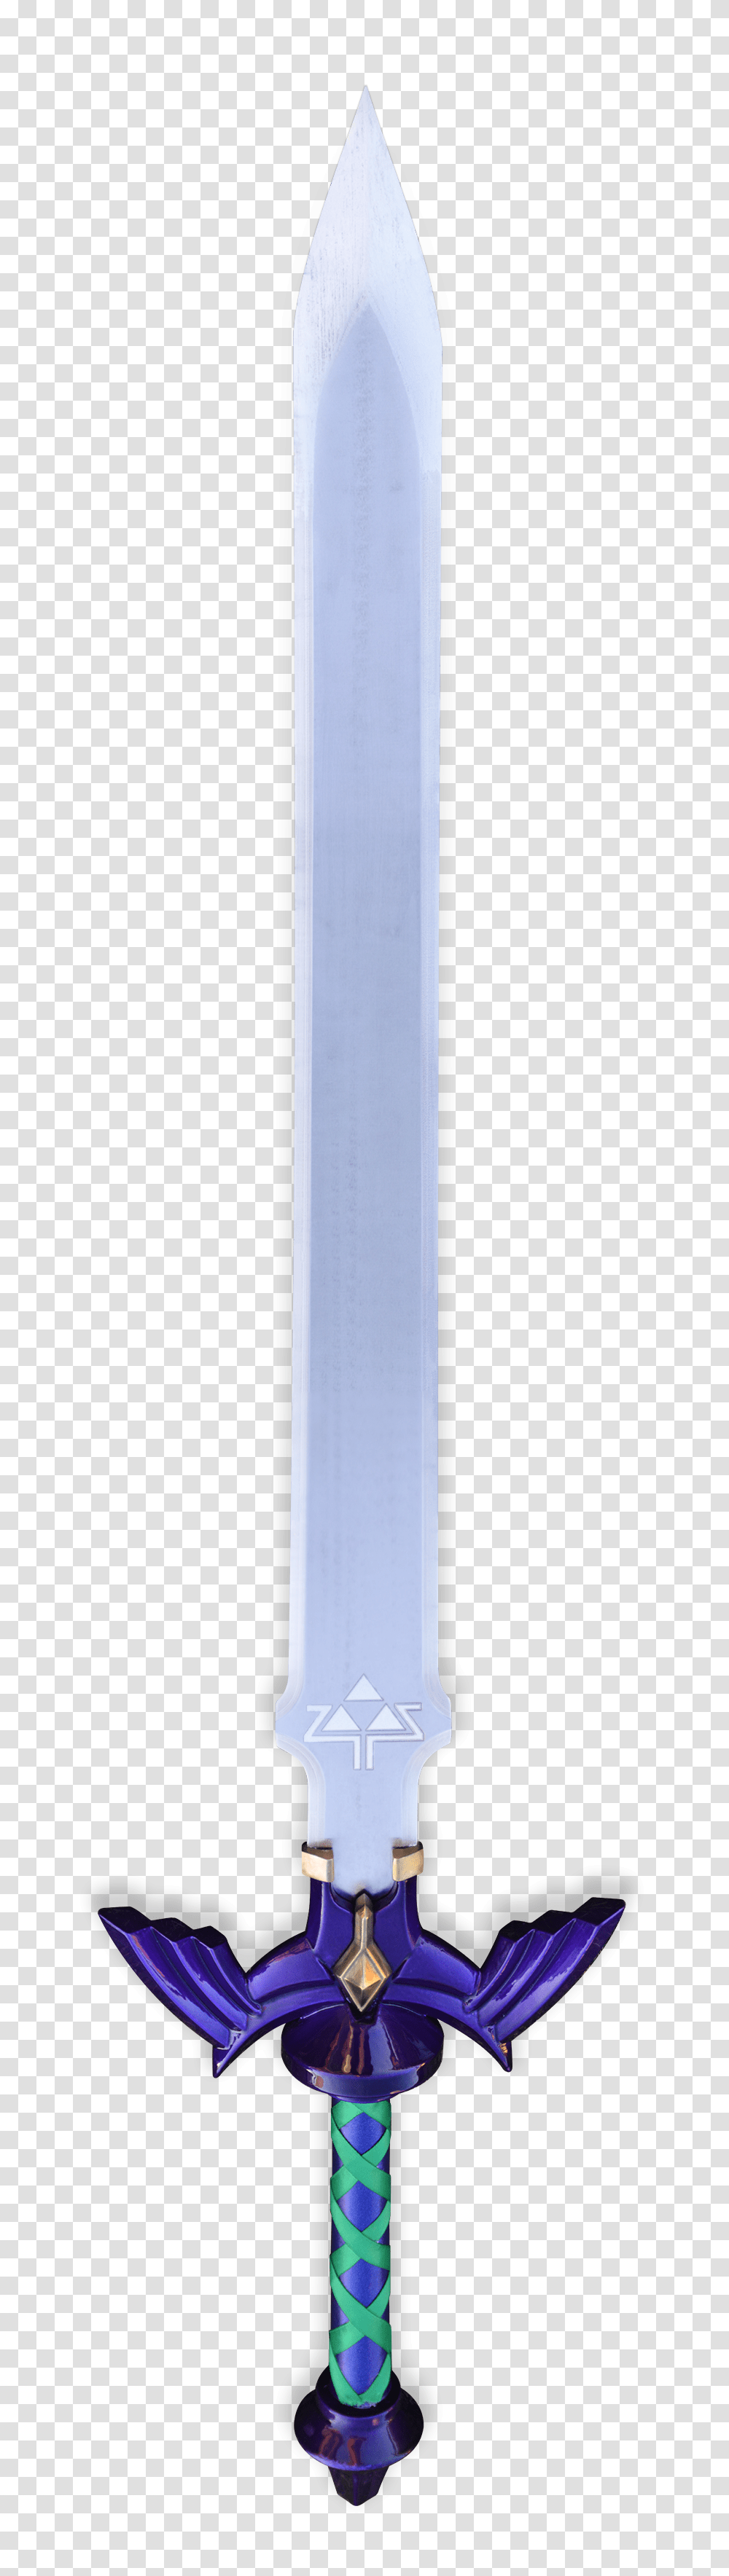 Making The Master Sword Zelda Universe, Blade, Weapon, Weaponry, Knife Transparent Png